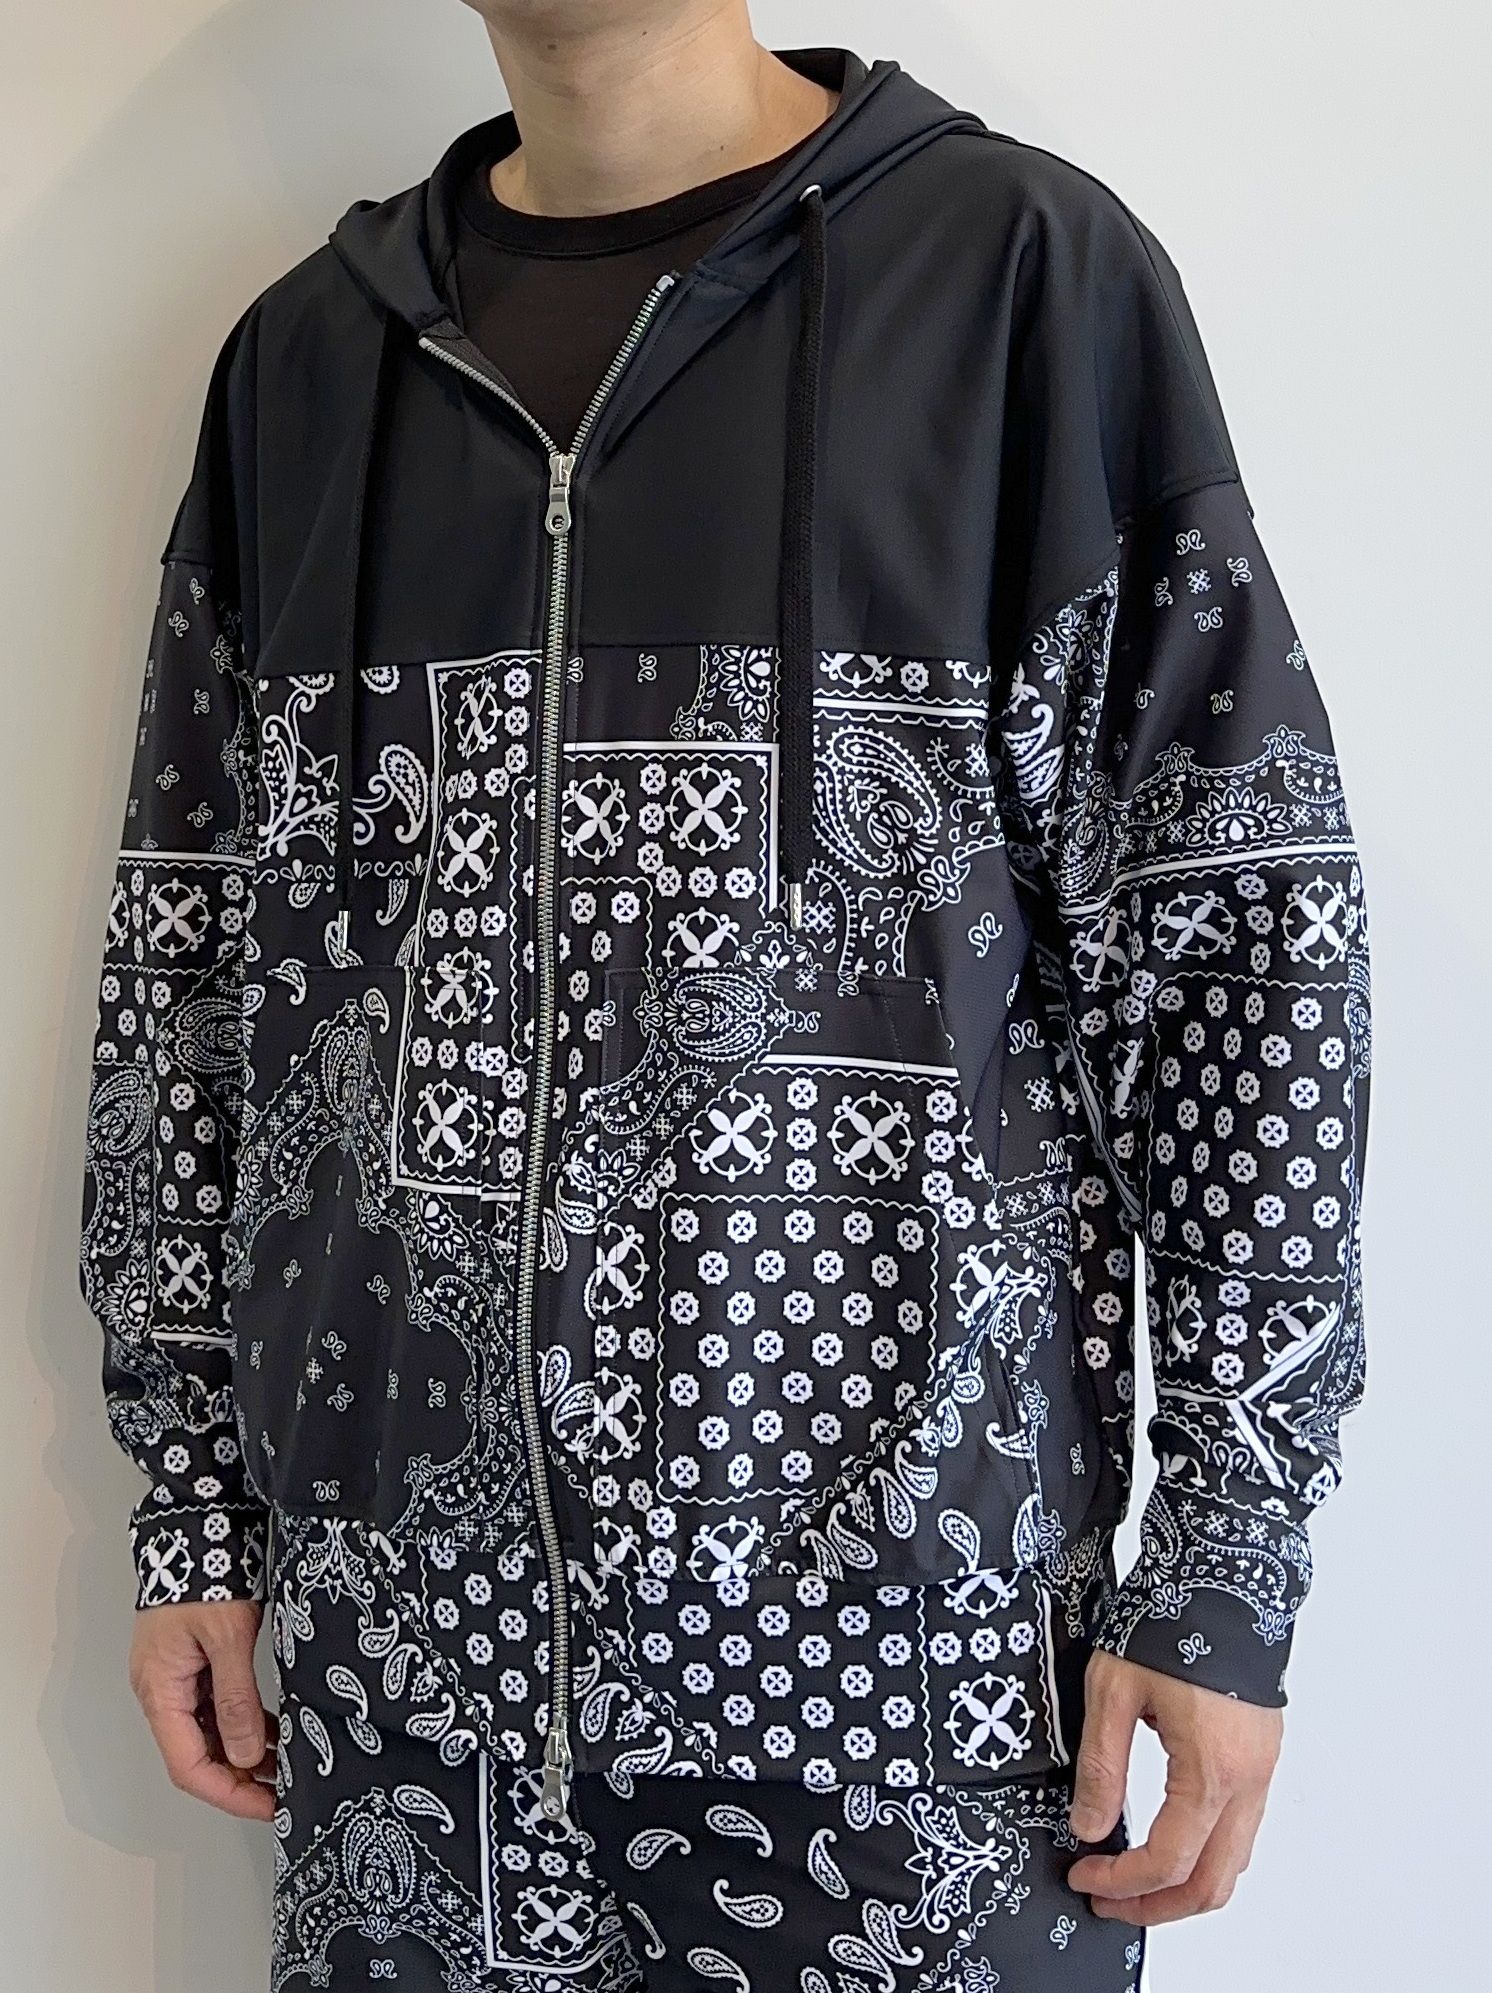 RESOUND CLOTHING - PAISELY RUSH OVER ZIPUP HOODIE / RC28-C-001 